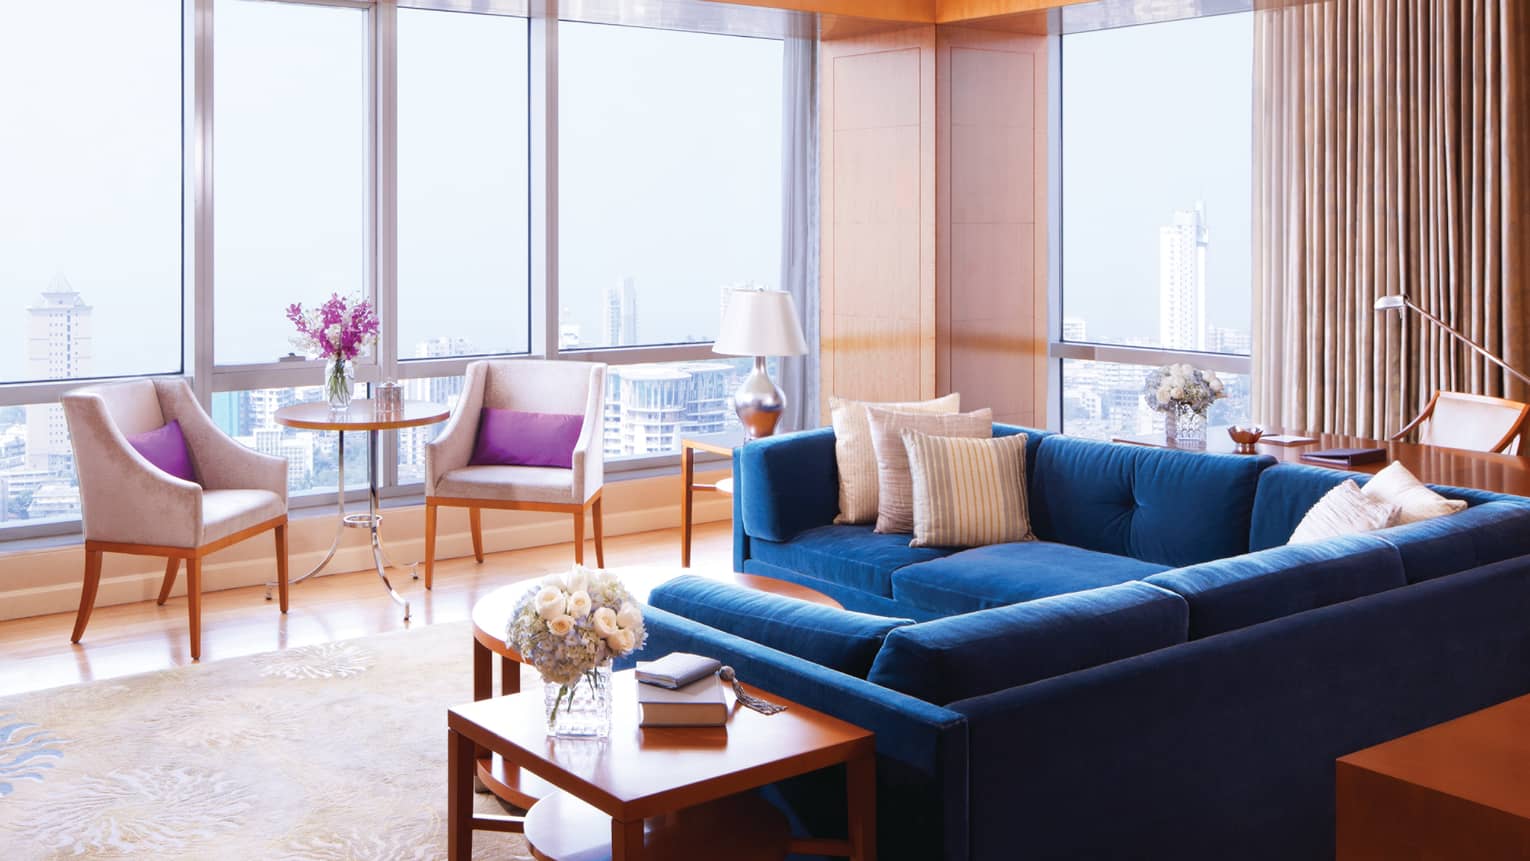 Deluxe Suite-Sea room with blue sectional sofa by floor-to-ceiling sunny windows, chairs